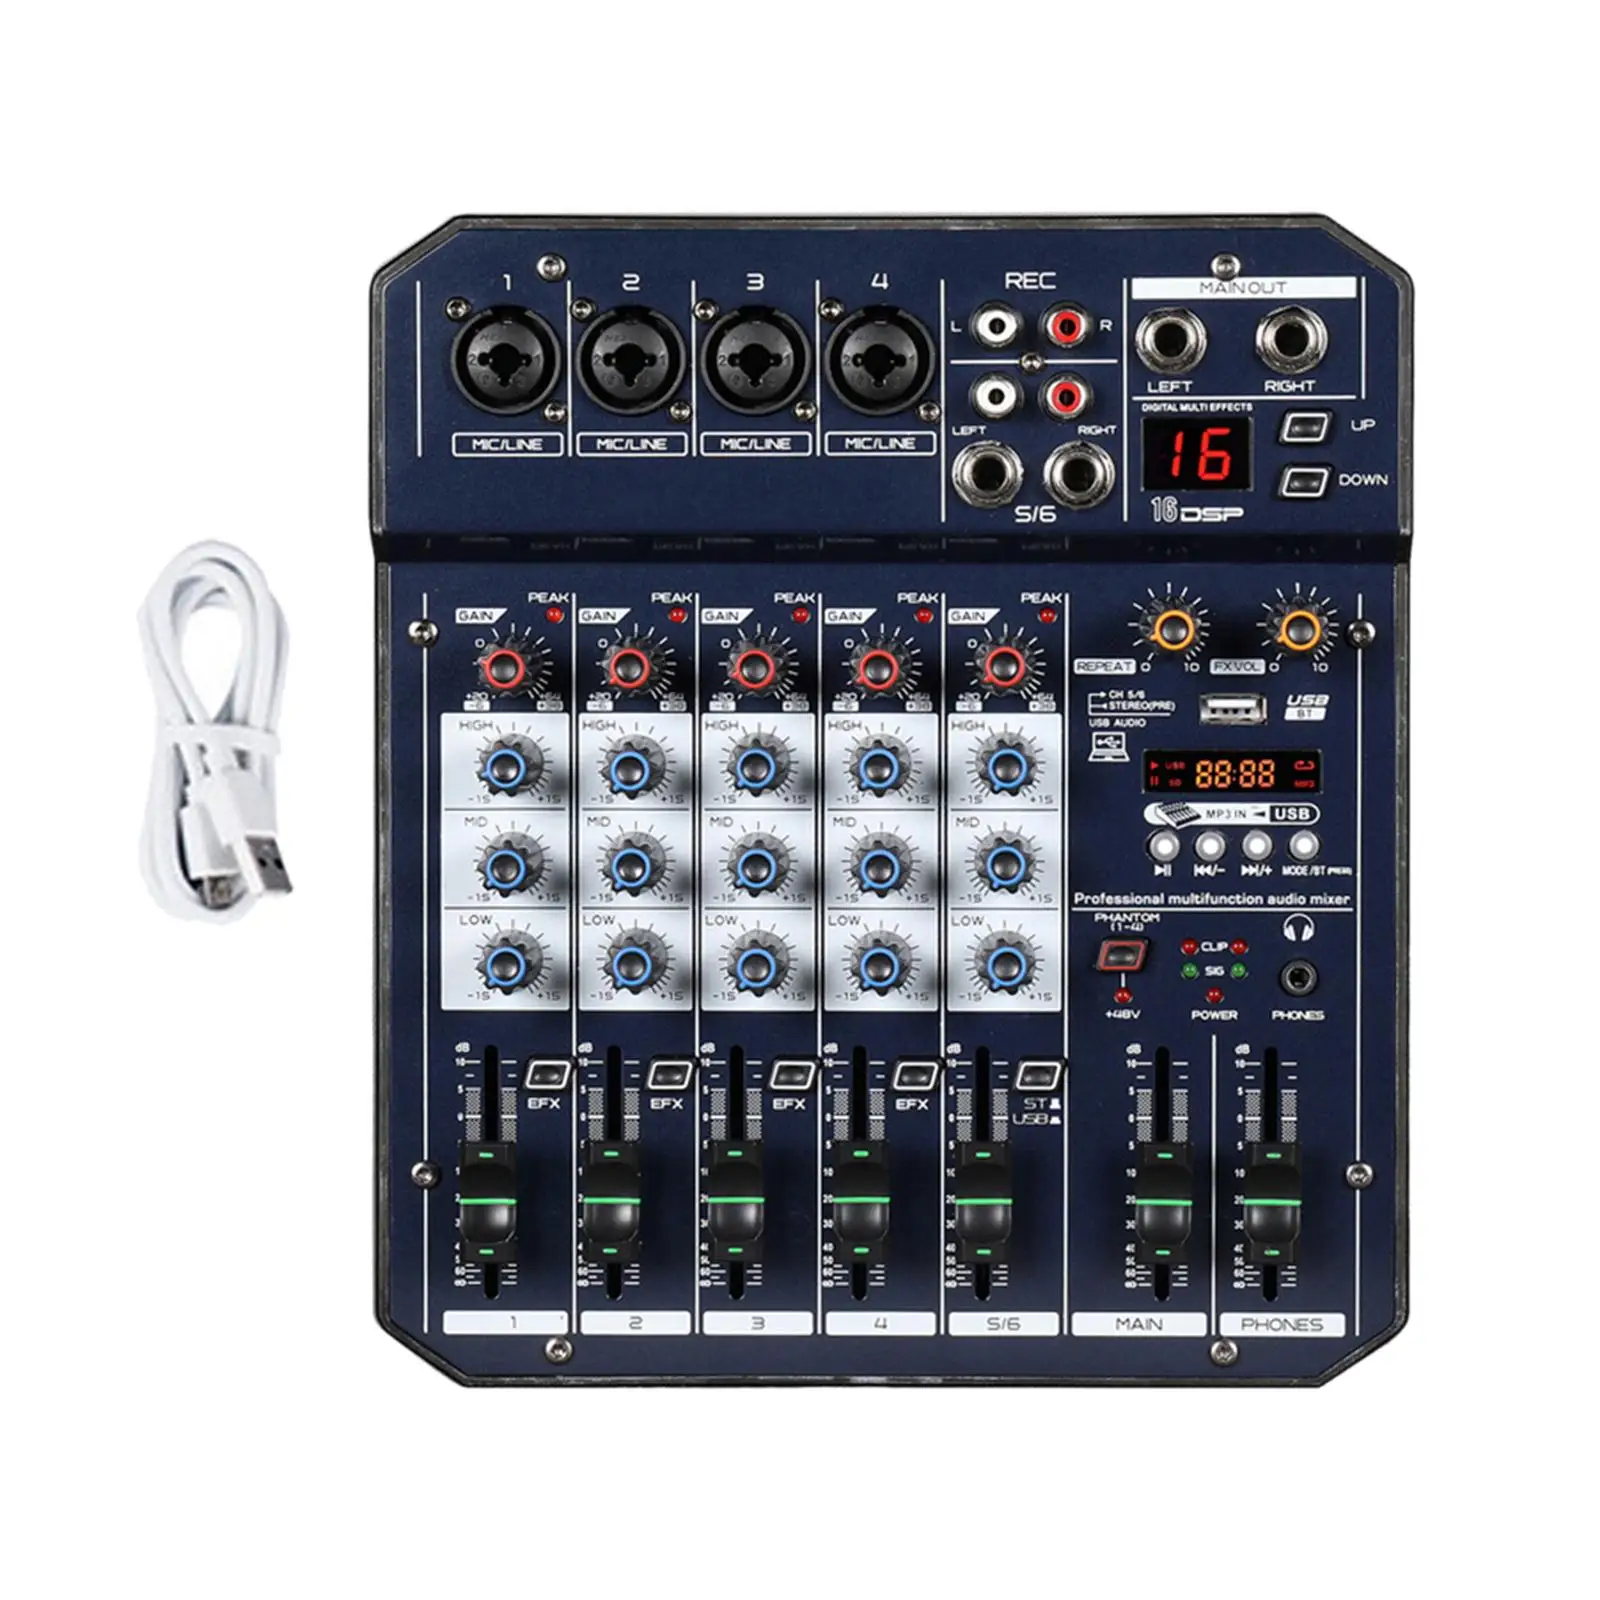 Audio Mixer Effects Mixer USB MP3 Computer Input Desk Console System US Adapter Sound Mixer Board for Podcasting Live Broadcasts